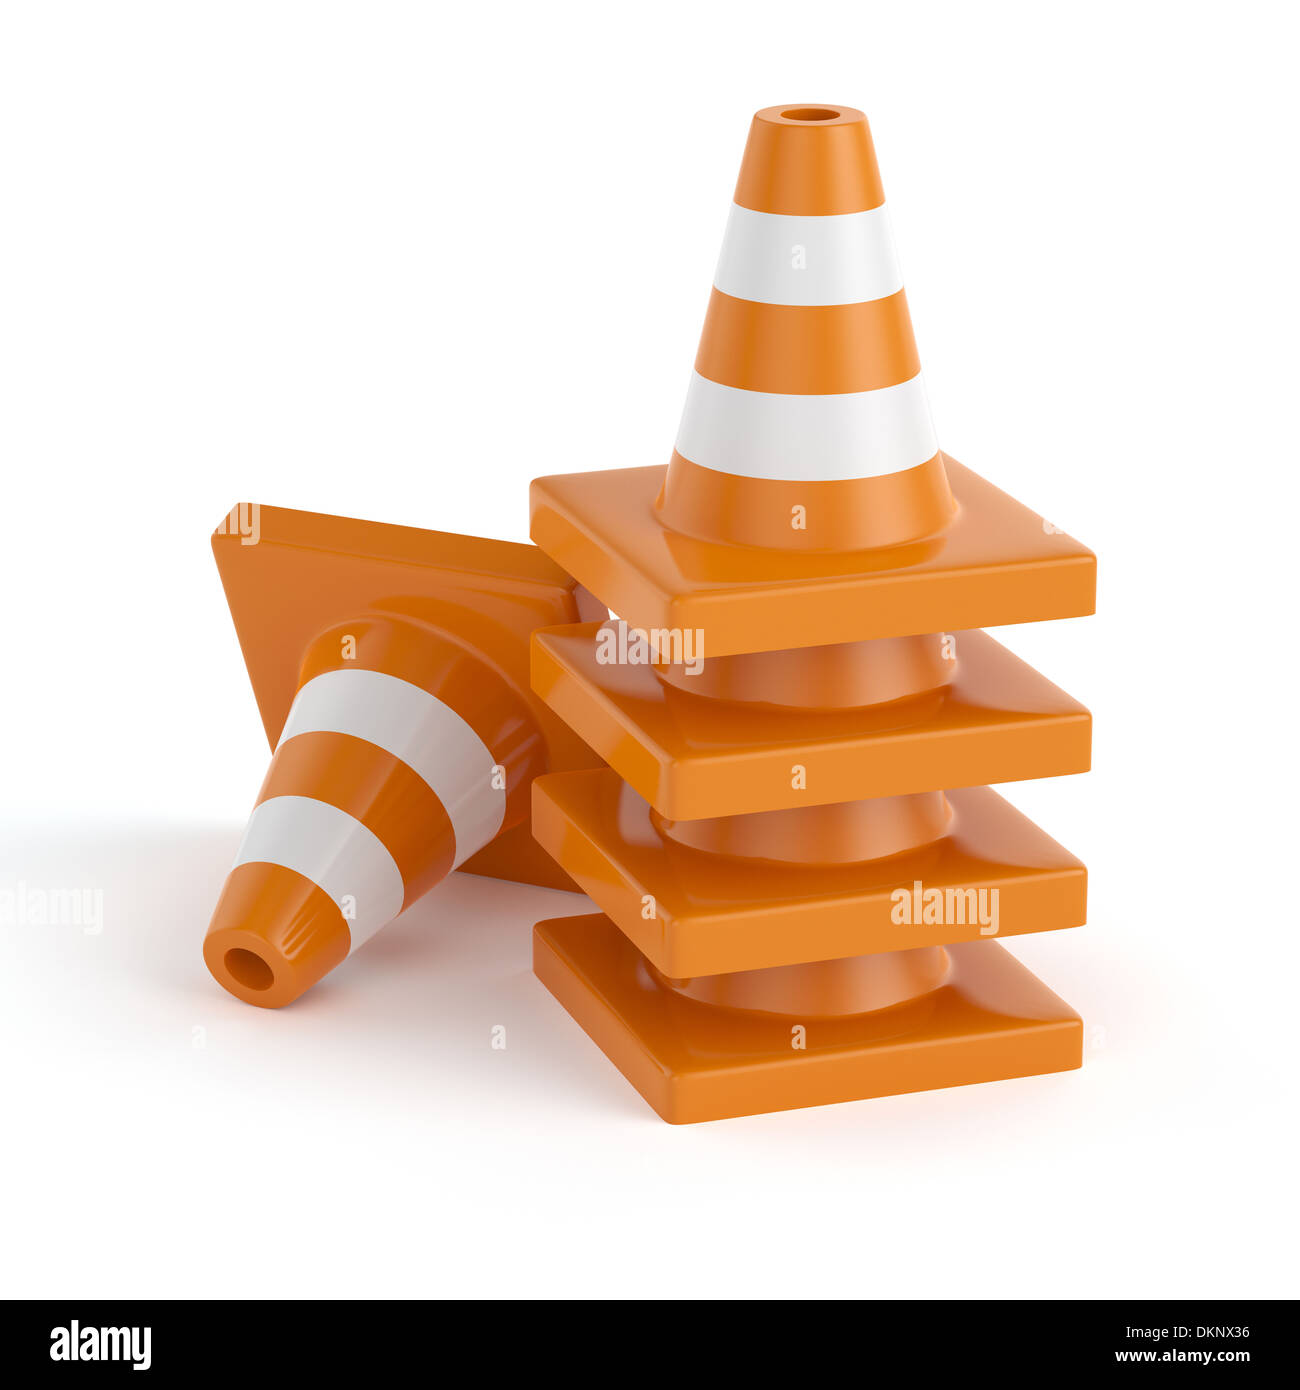 3d illustration of road cones. Isolated on white background Stock Photo